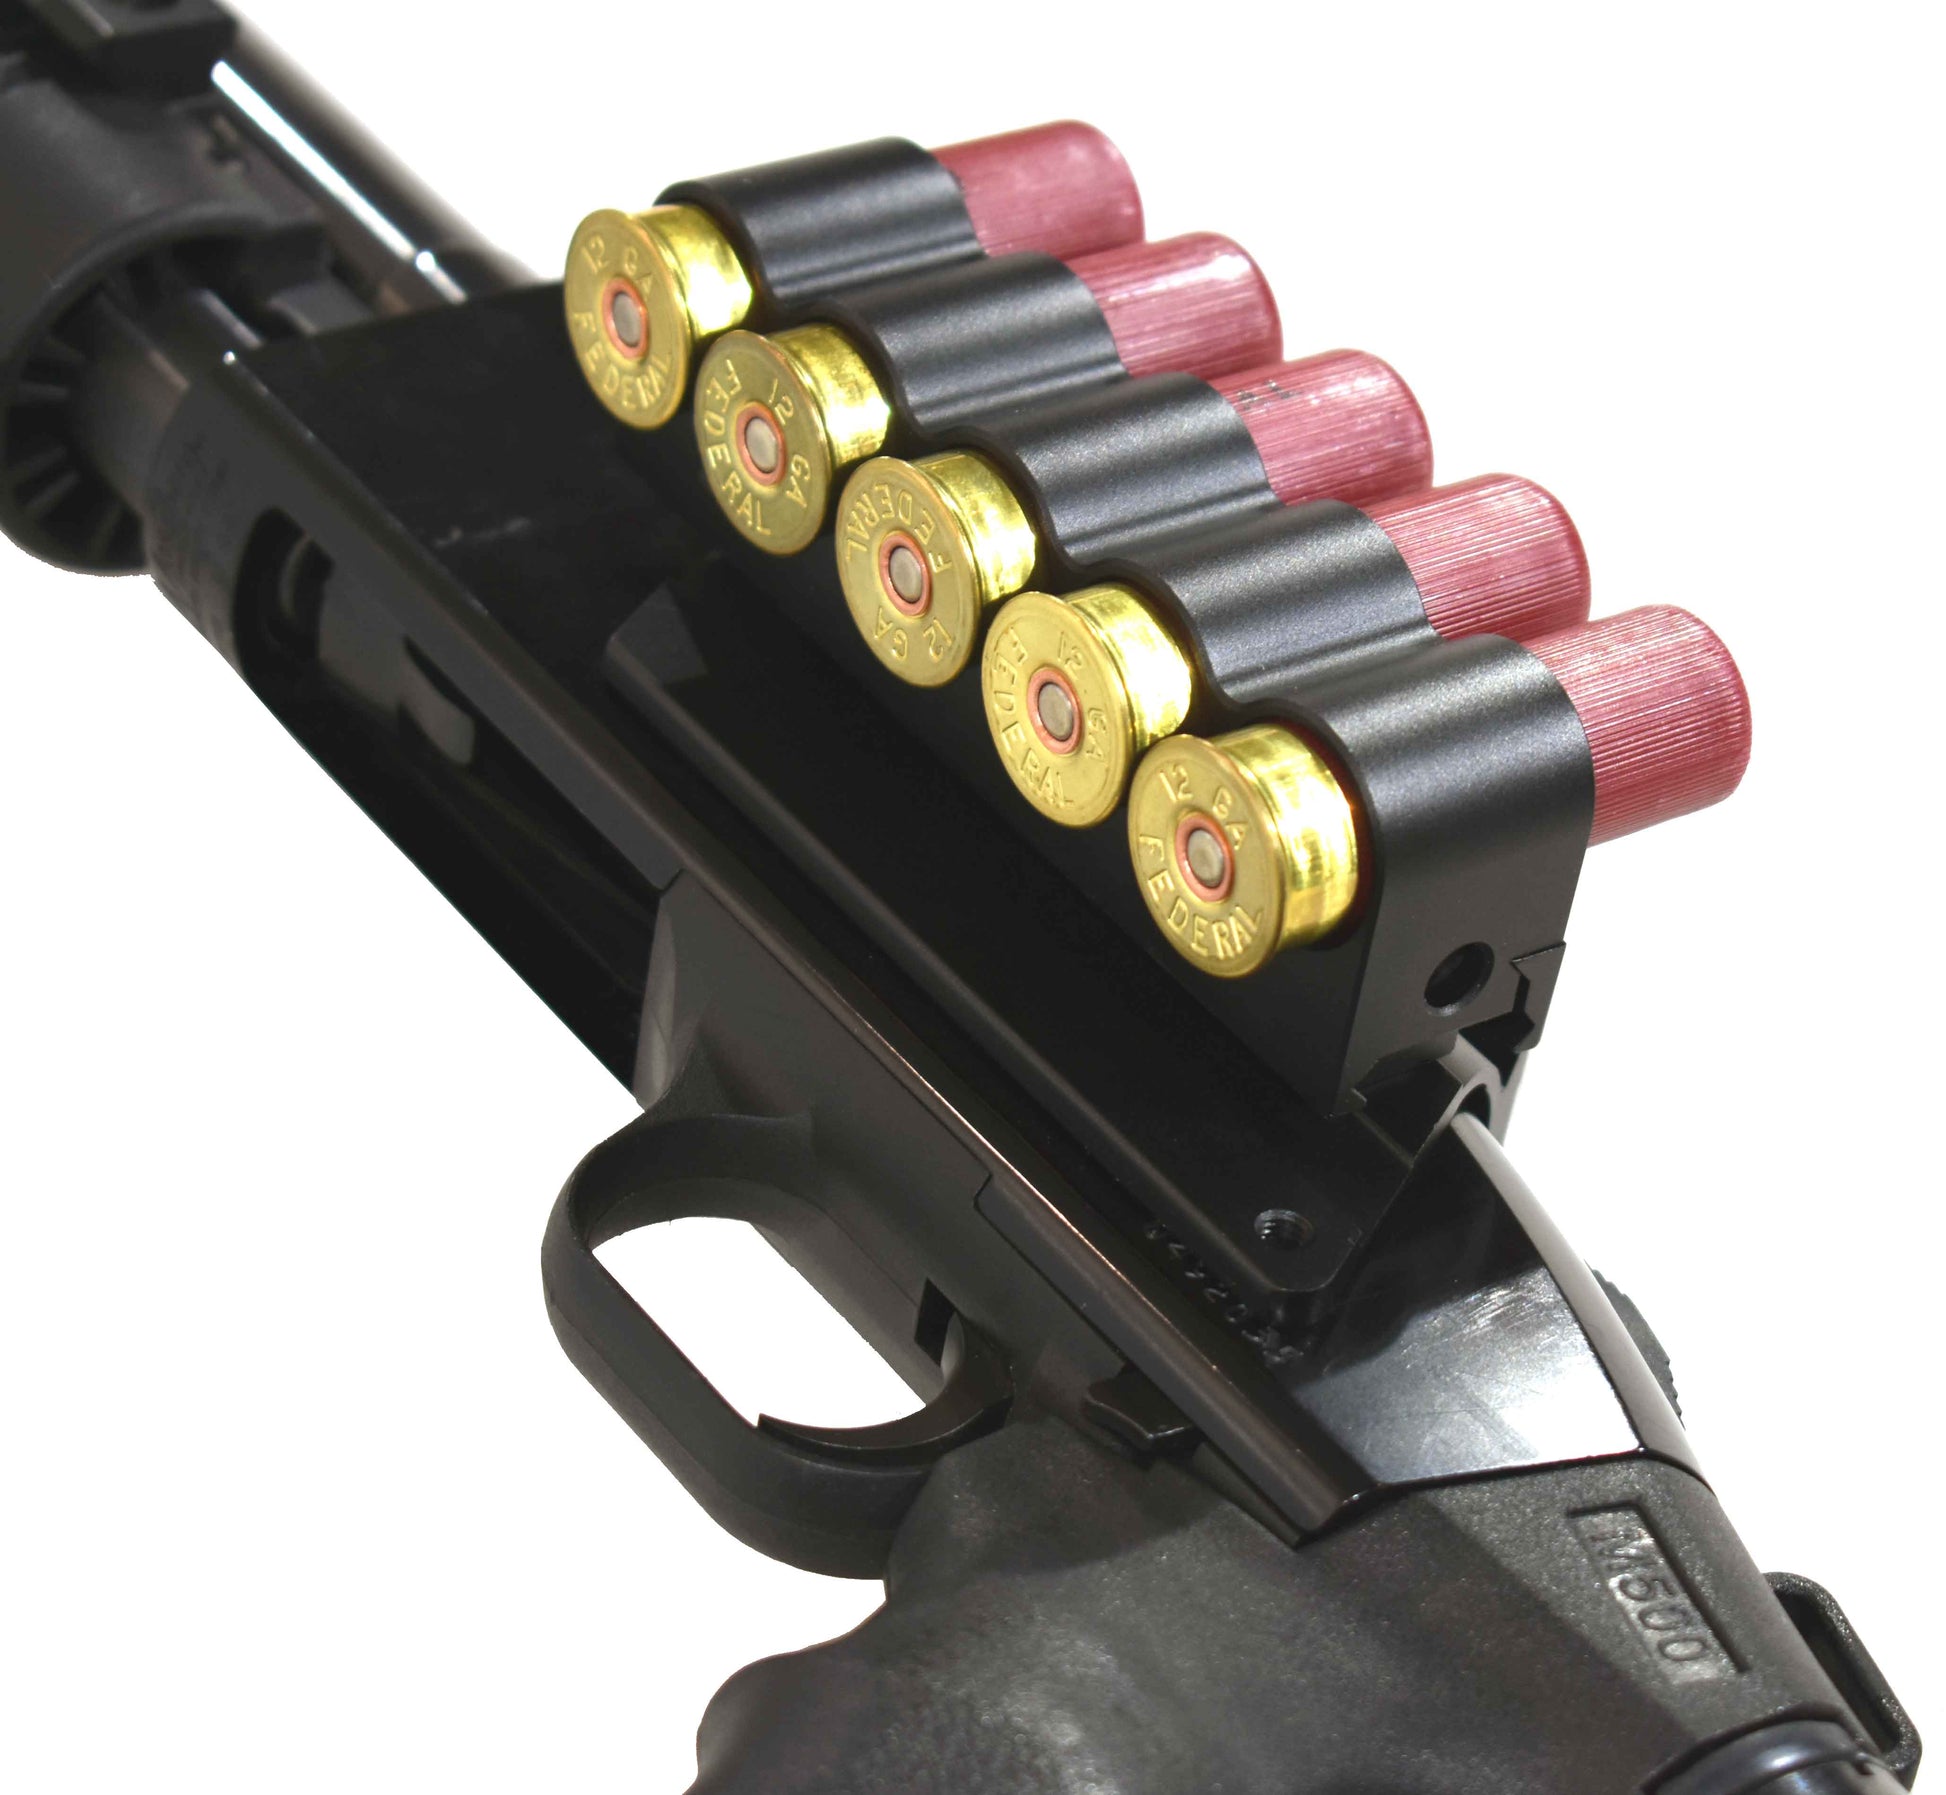 mossberg 500 replacement parts shell holder and saddle mount.